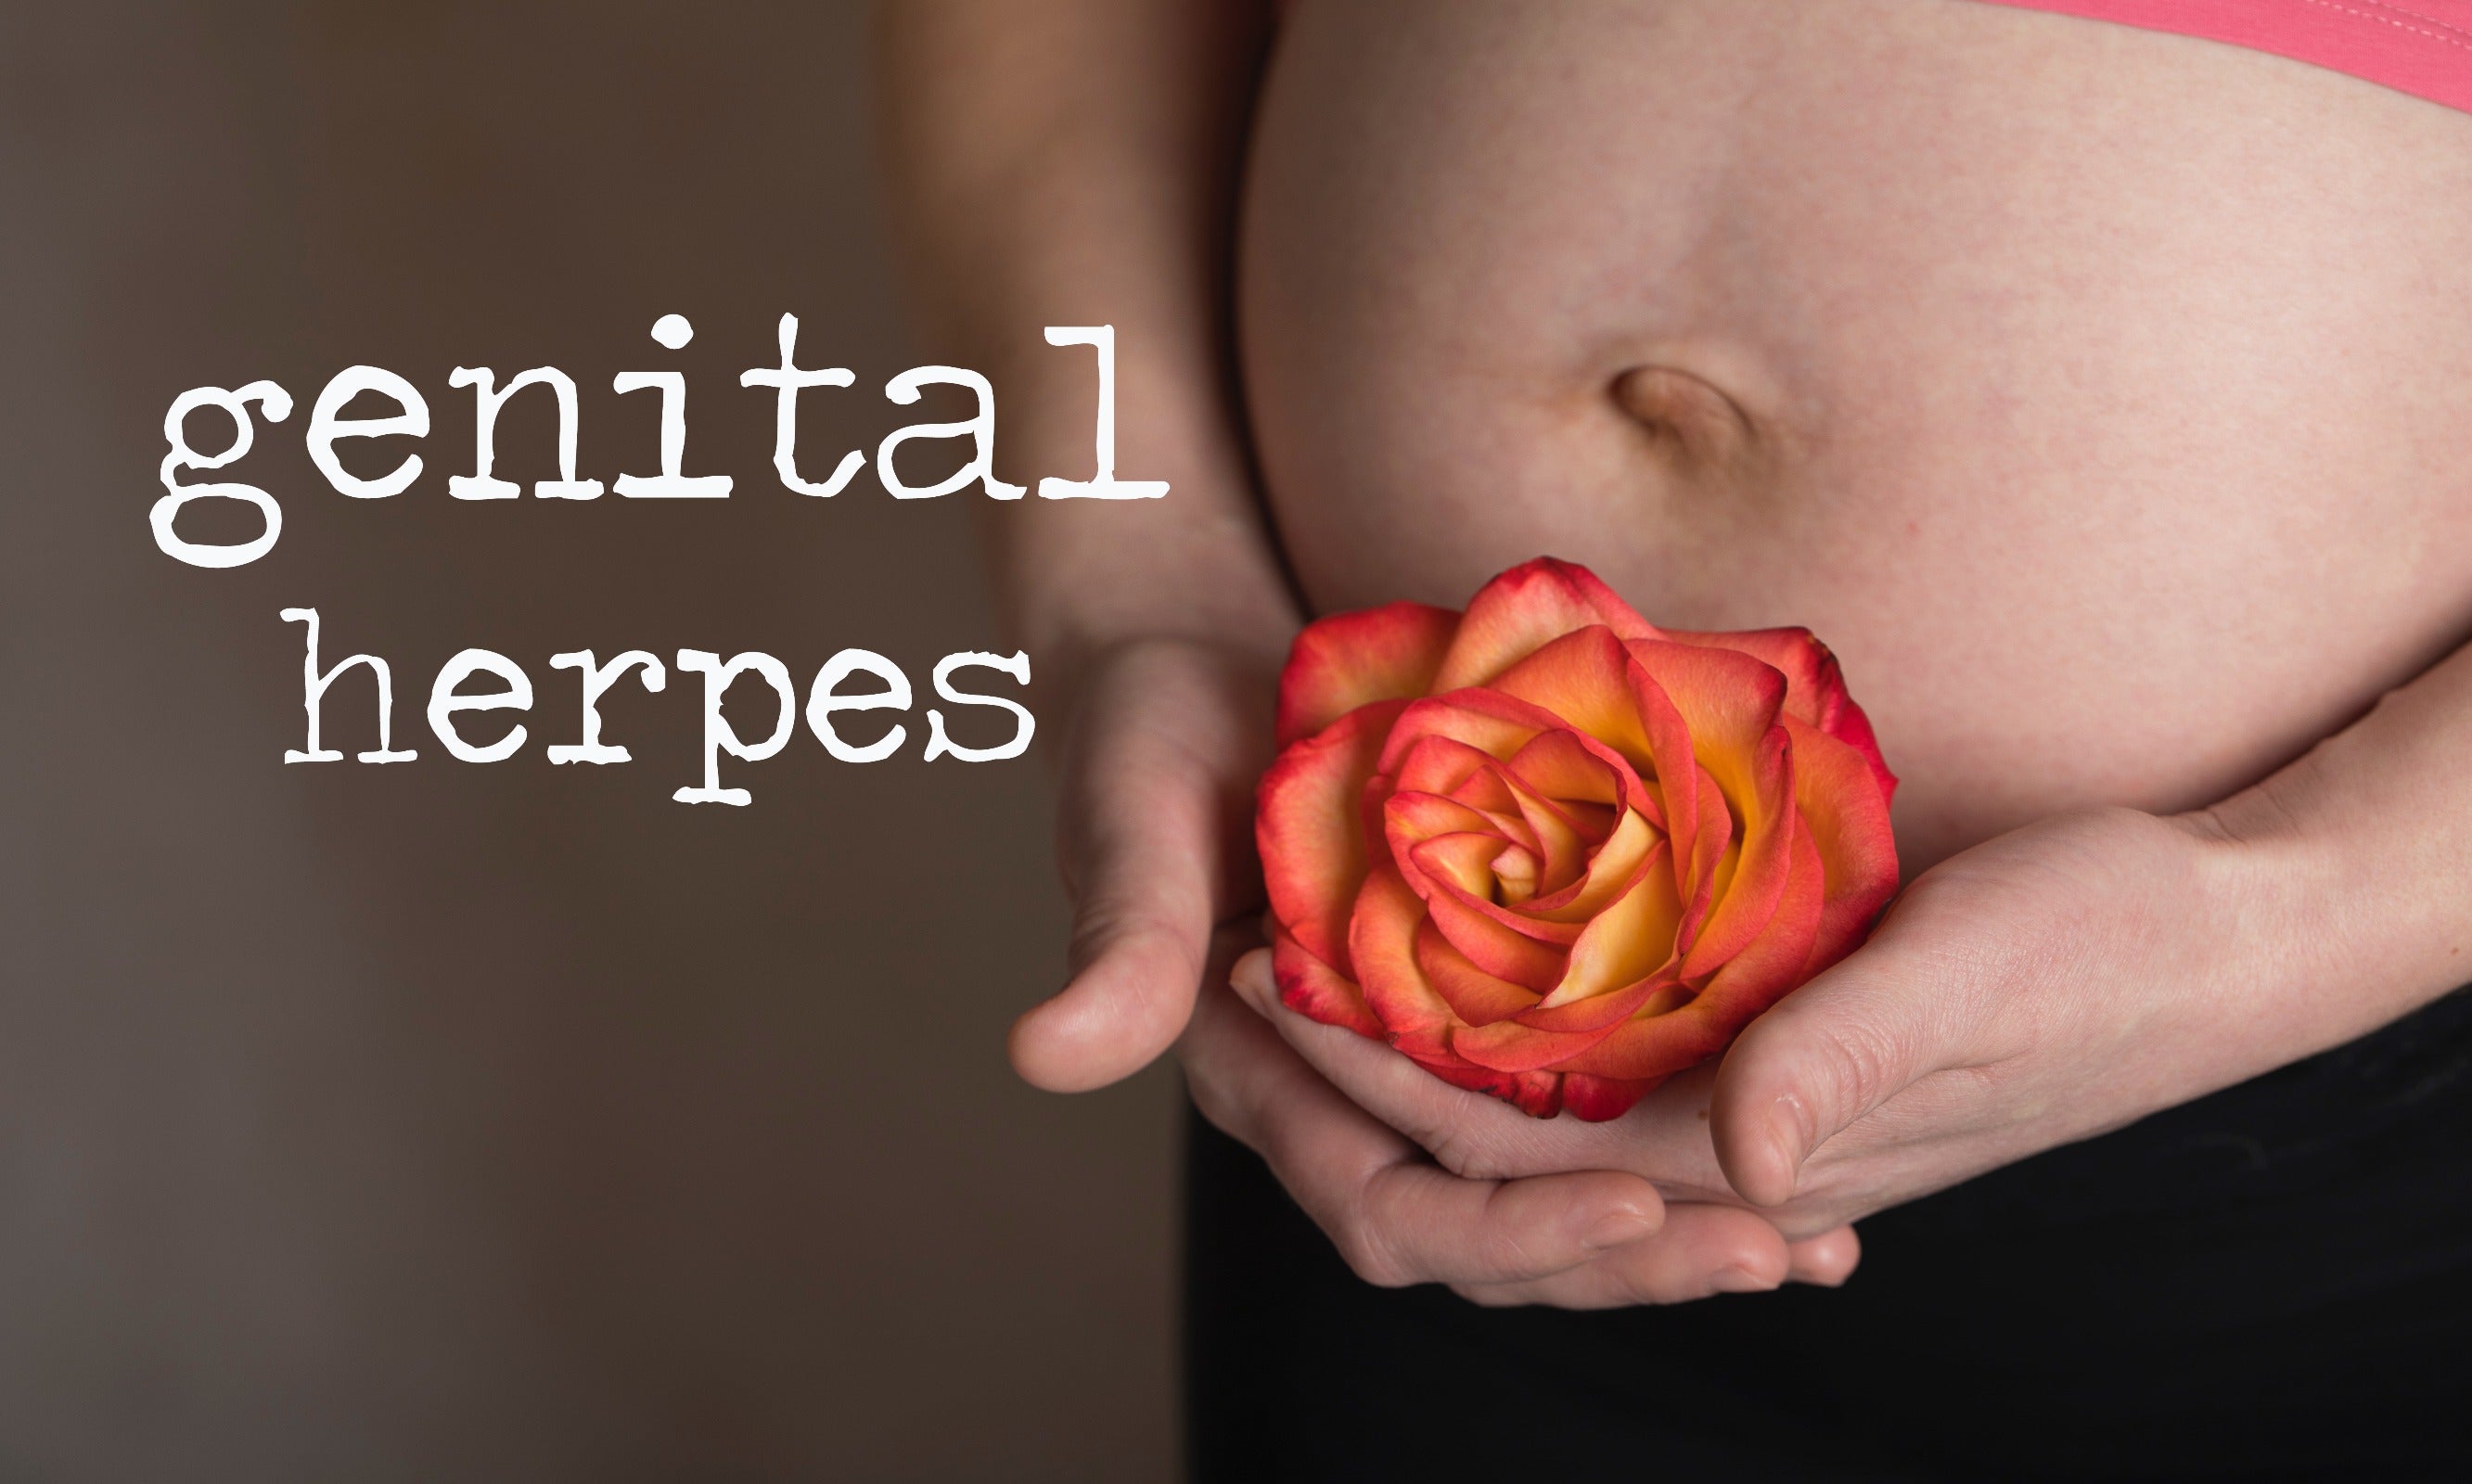 The natural immune system and genital herpes